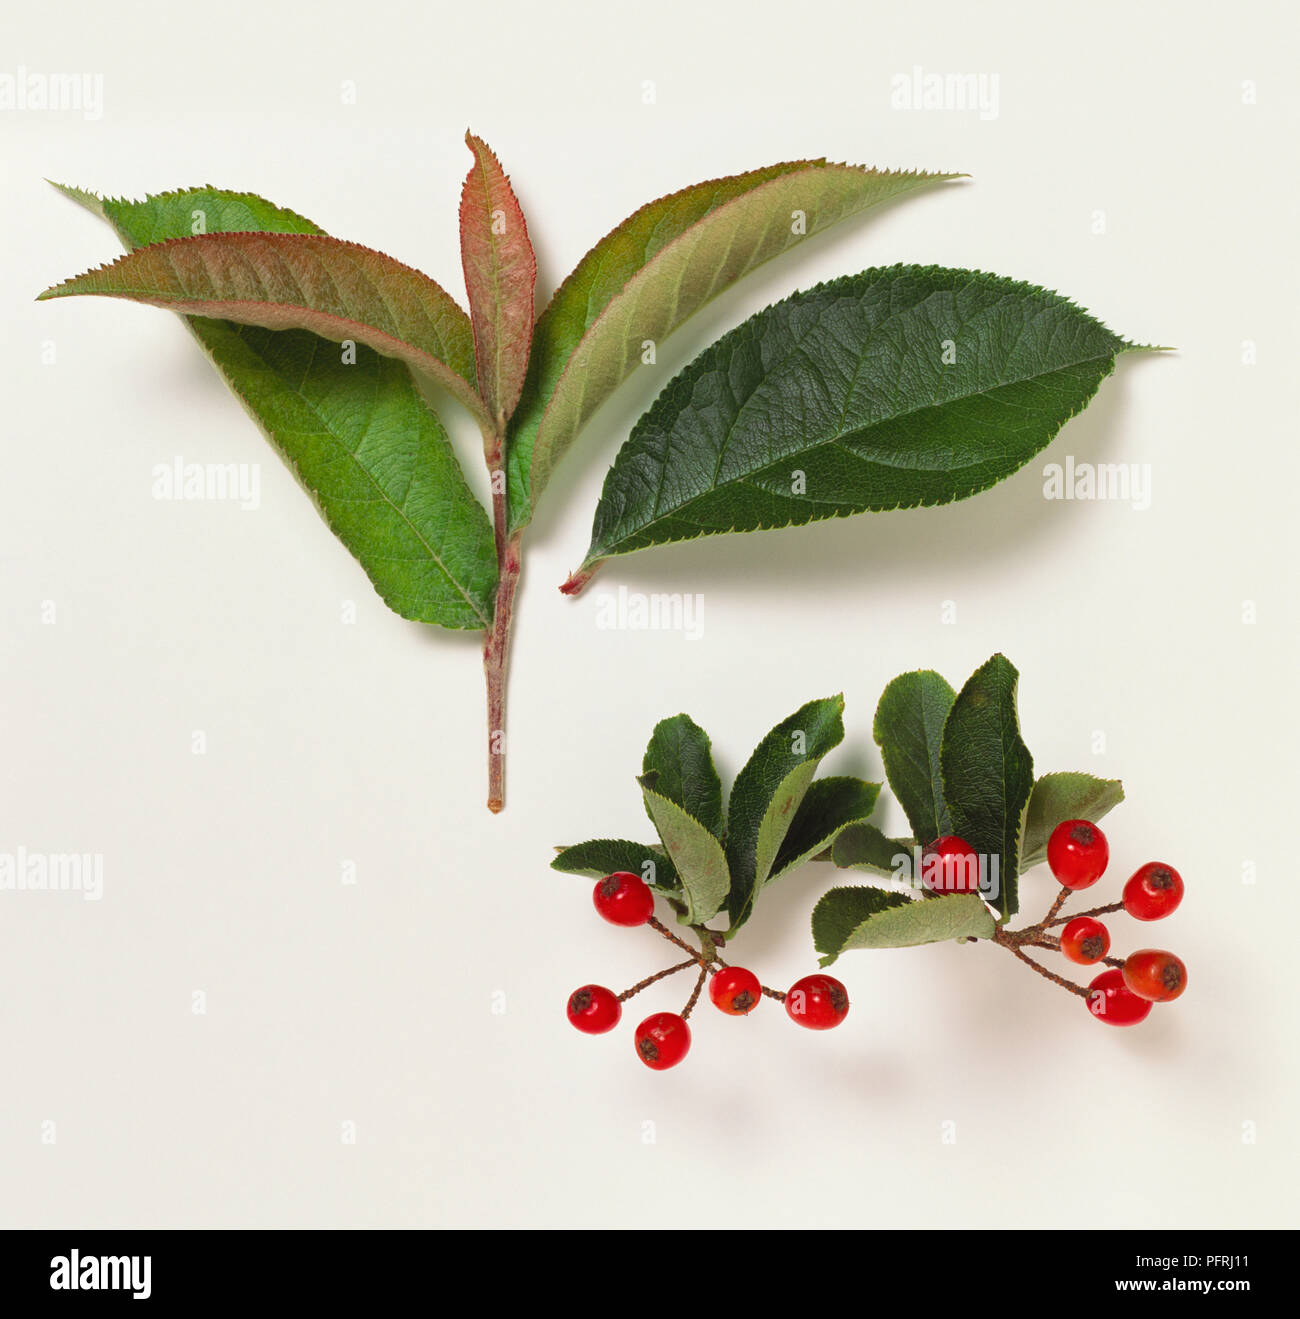 Photinia villosa, stems with leaves and red berries Stock Photo